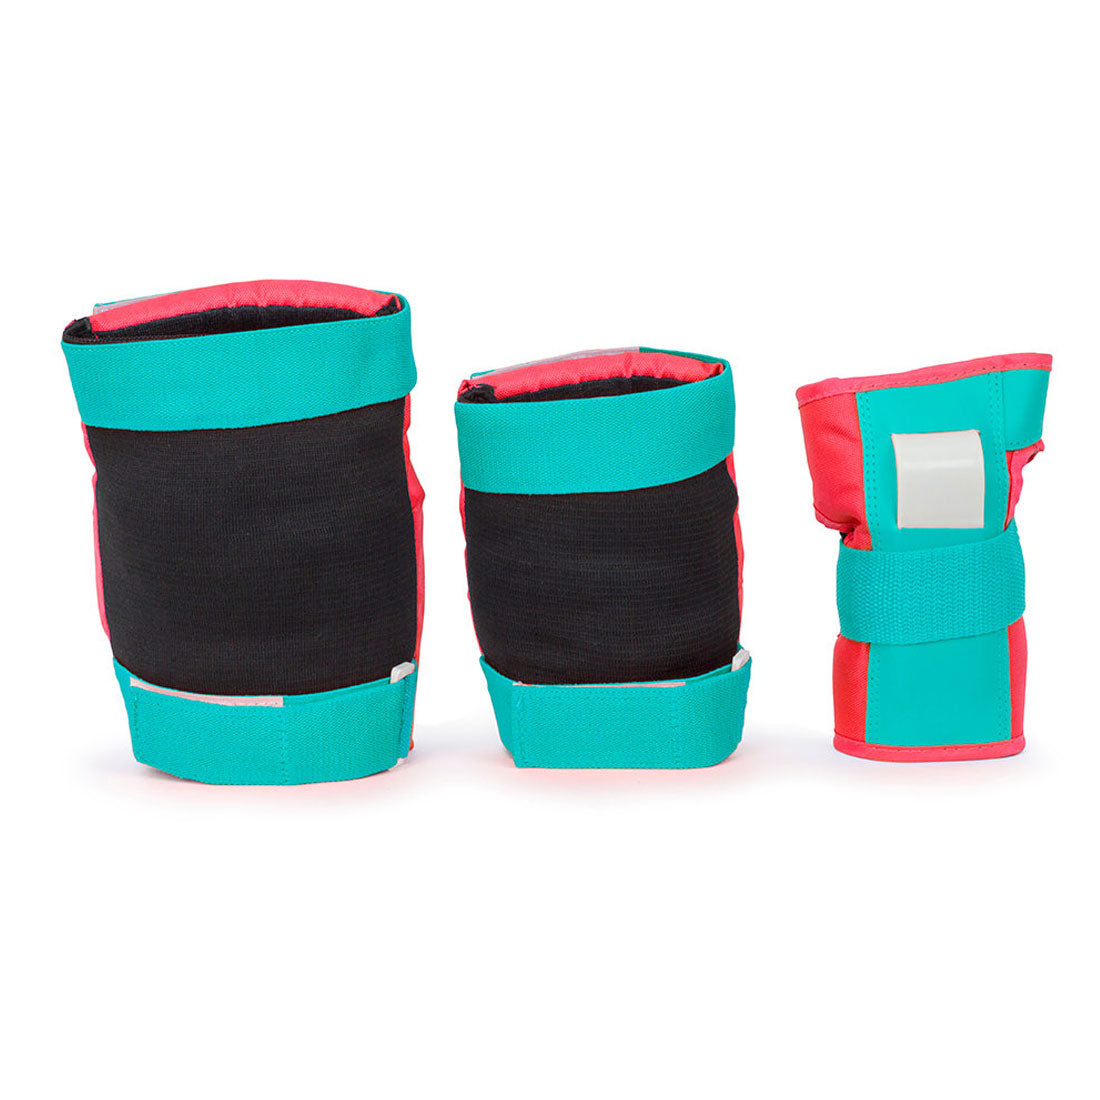 Rio Roller Triple Pad Set - Red/Mint Protective Gear